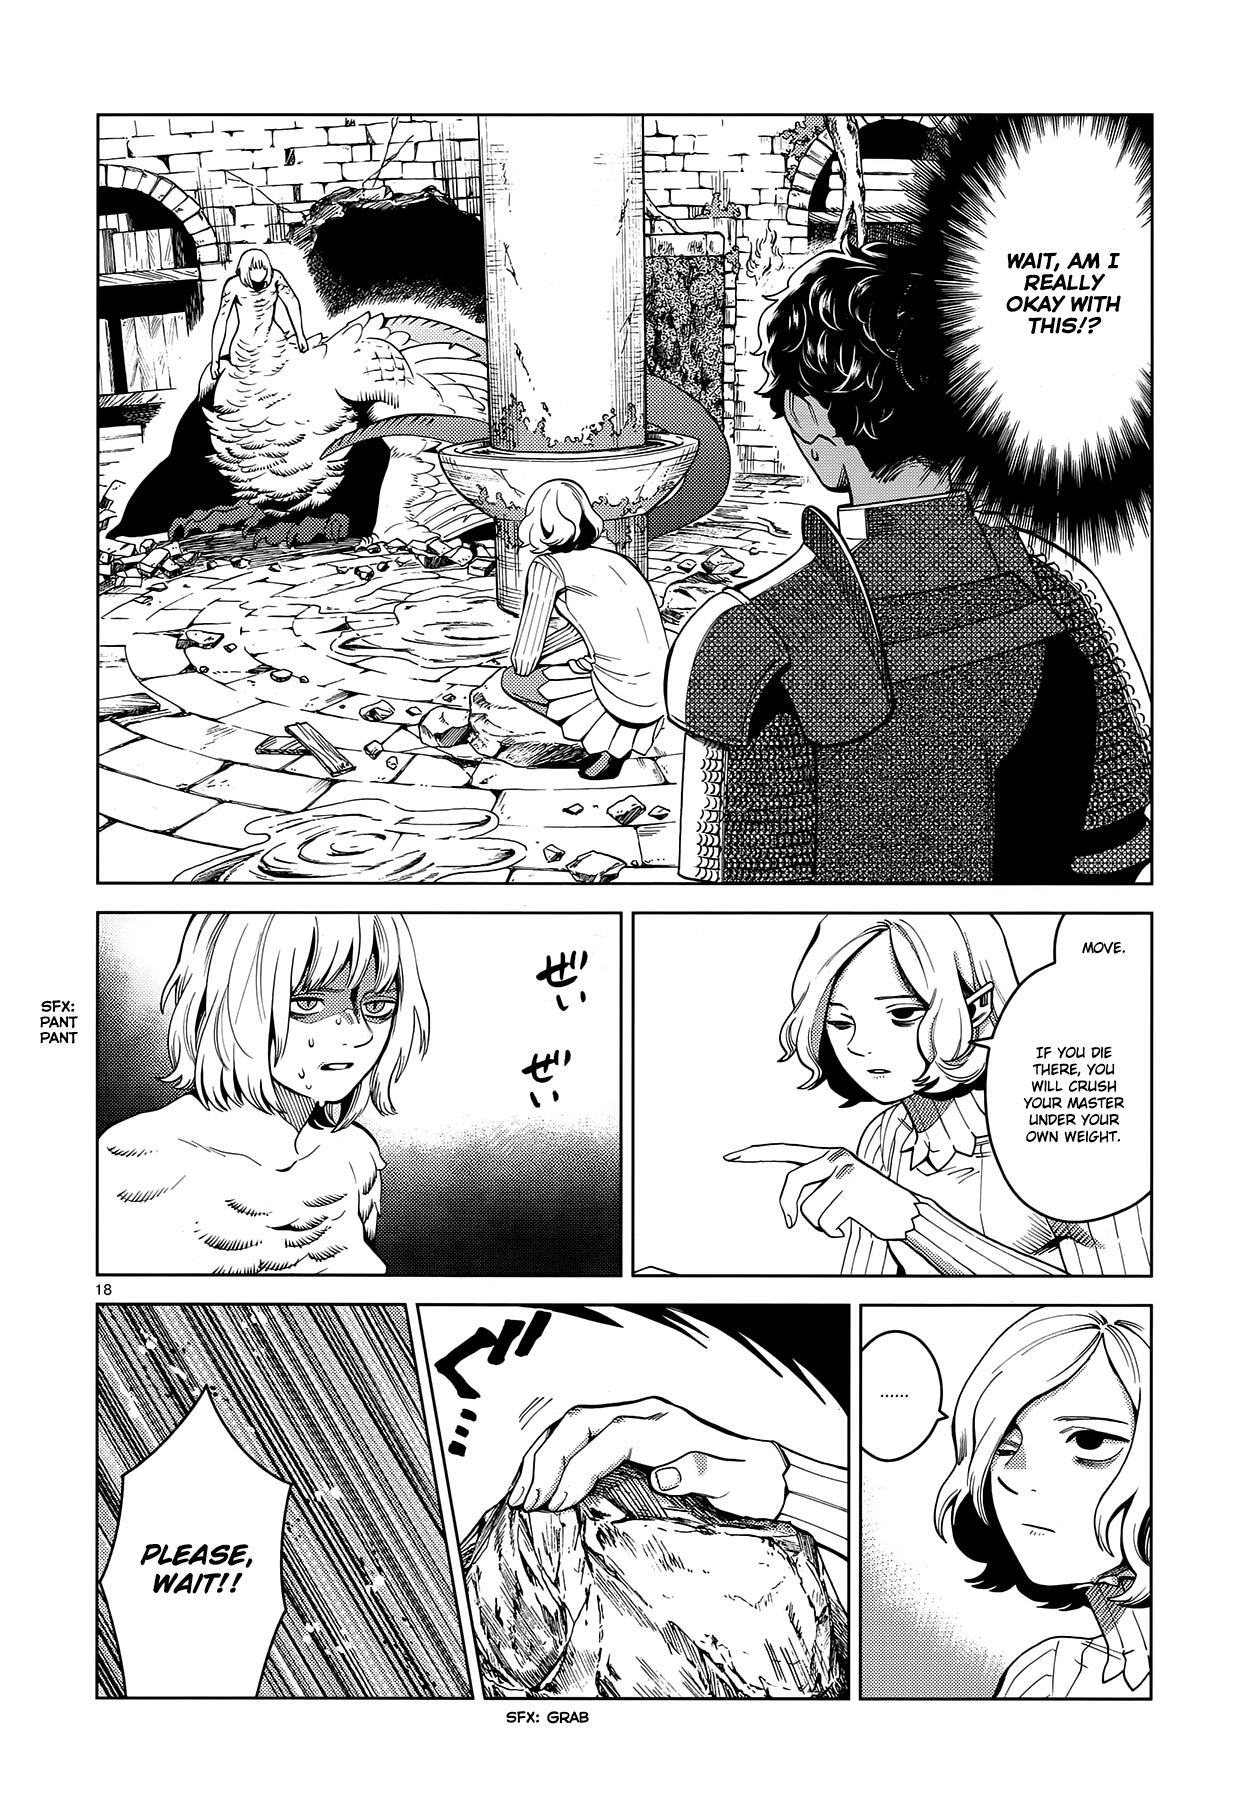 Dungeon Meshi Chapter 55: On The 1St Level, Part Iii page 17 - Mangakakalot